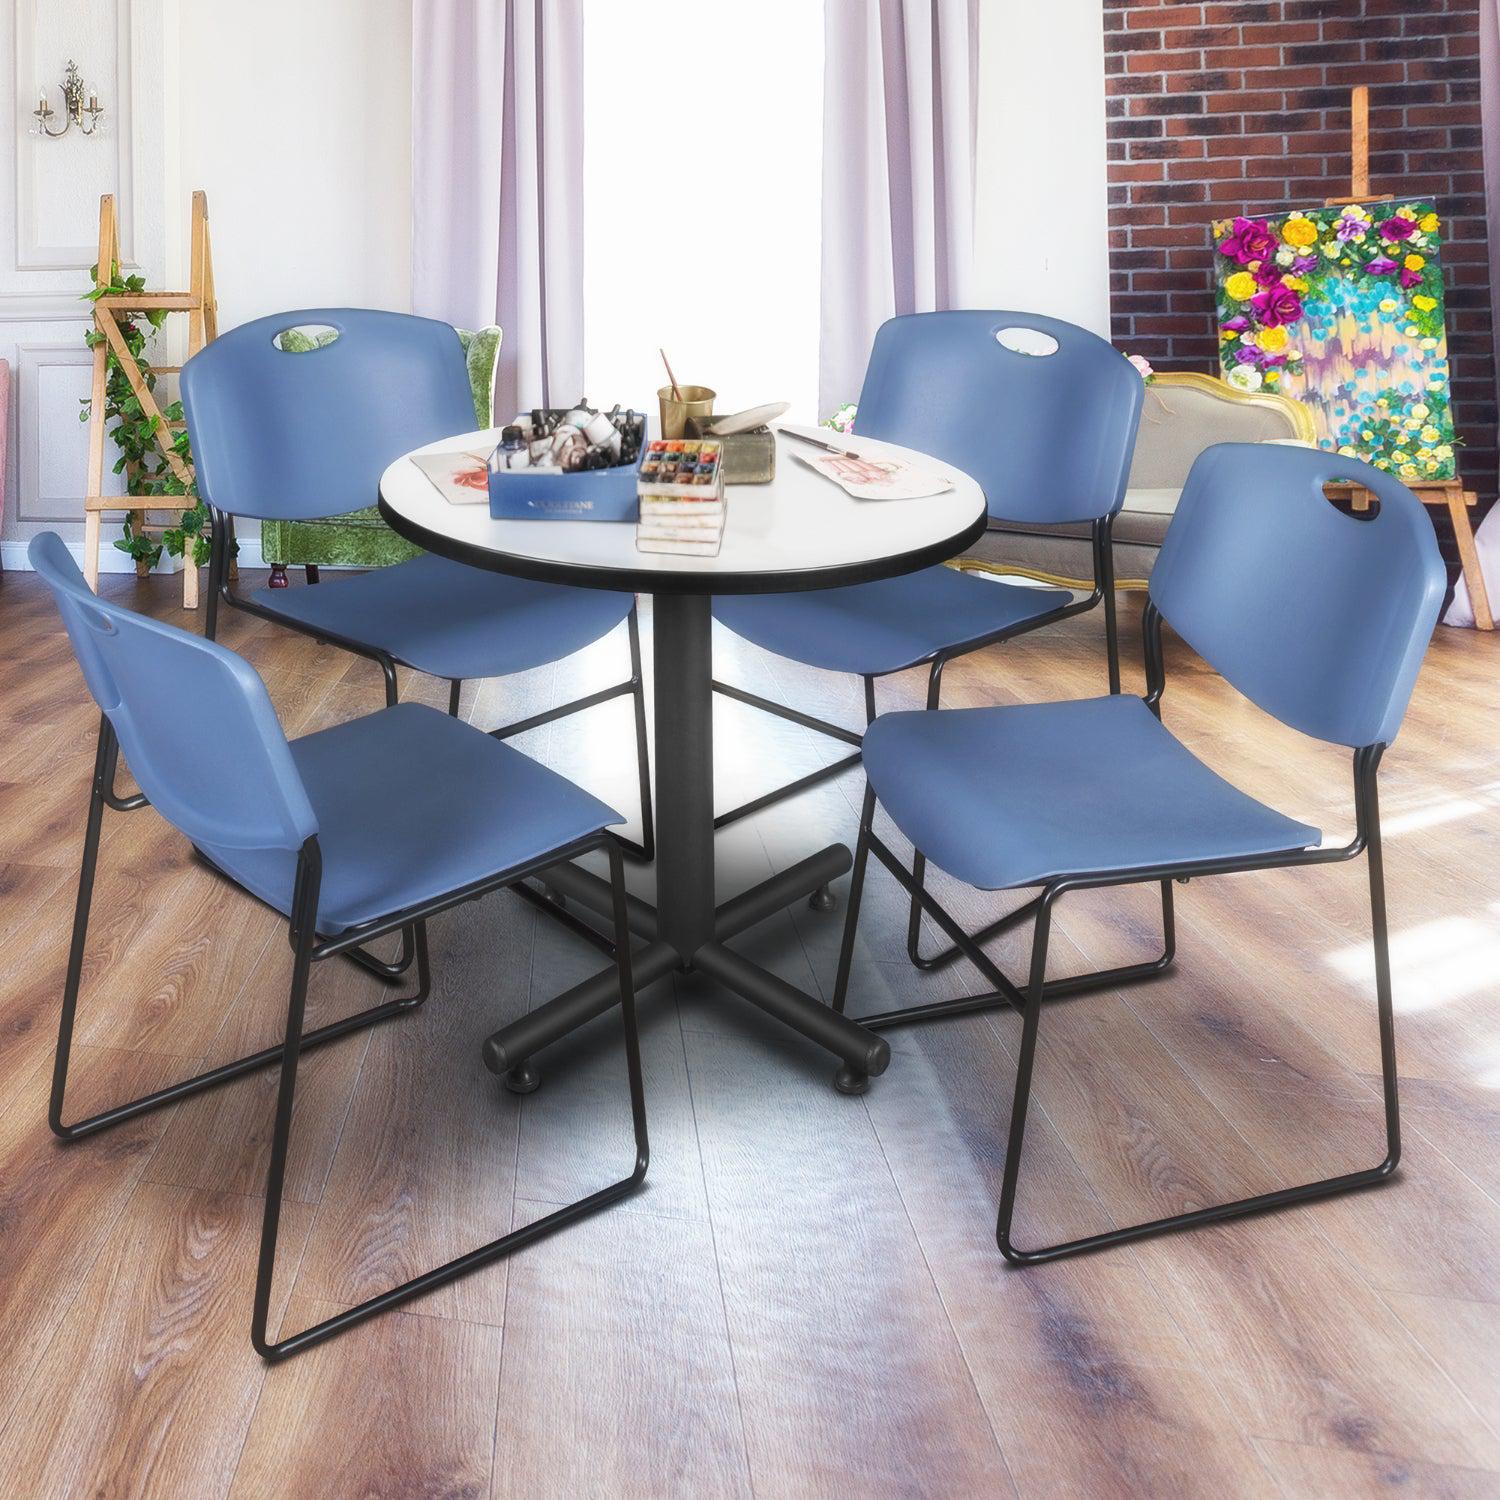 Kobe Round Breakroom Table and Chair Package, Kobe 30" Round X-Base Breakroom Table with 4 Zeng Stack Chairs